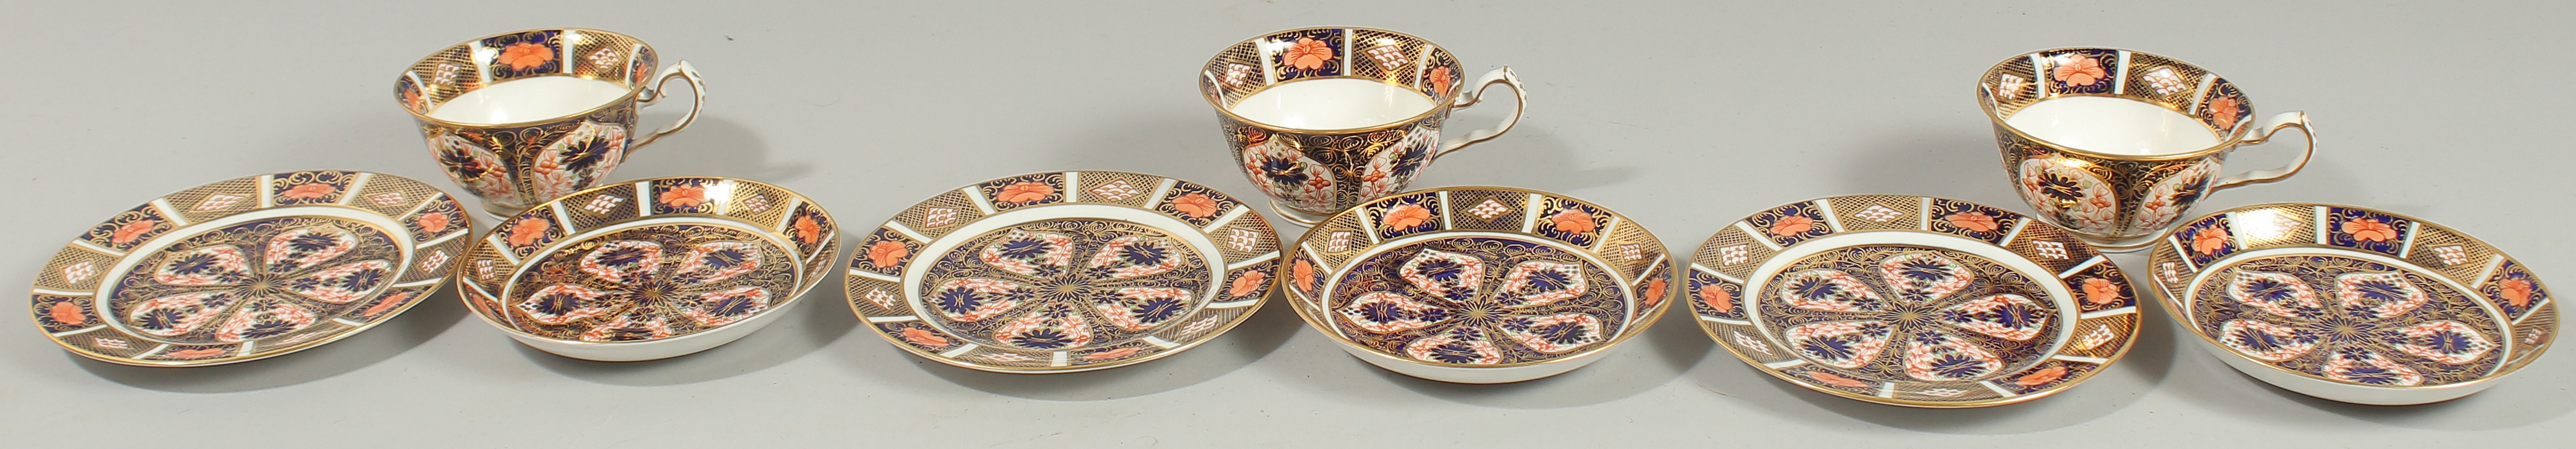 THREE ROYAL CROWN DERBY TEA CUPS, SAUCERS AND SIDE PLATES. Pattern no. 1128.